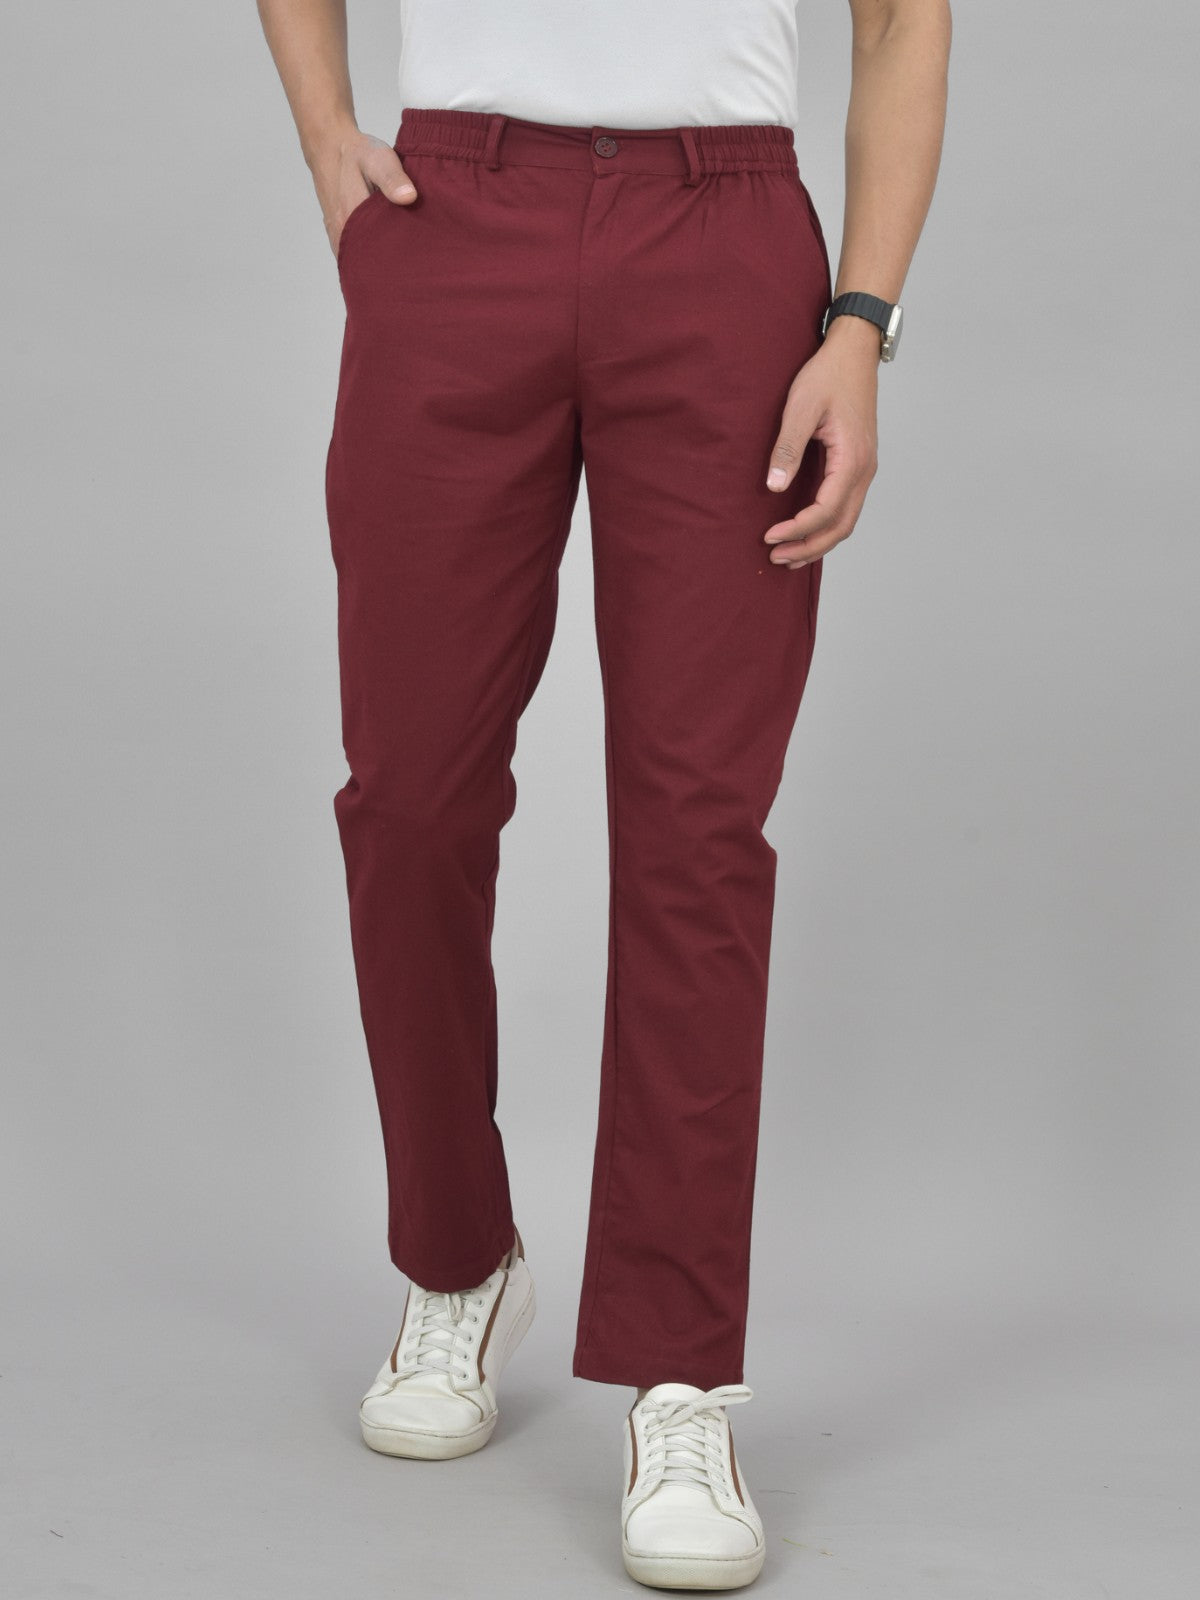 Combo Pack Of Mens Grey And Wine Regualr Fit Cotton Trouser